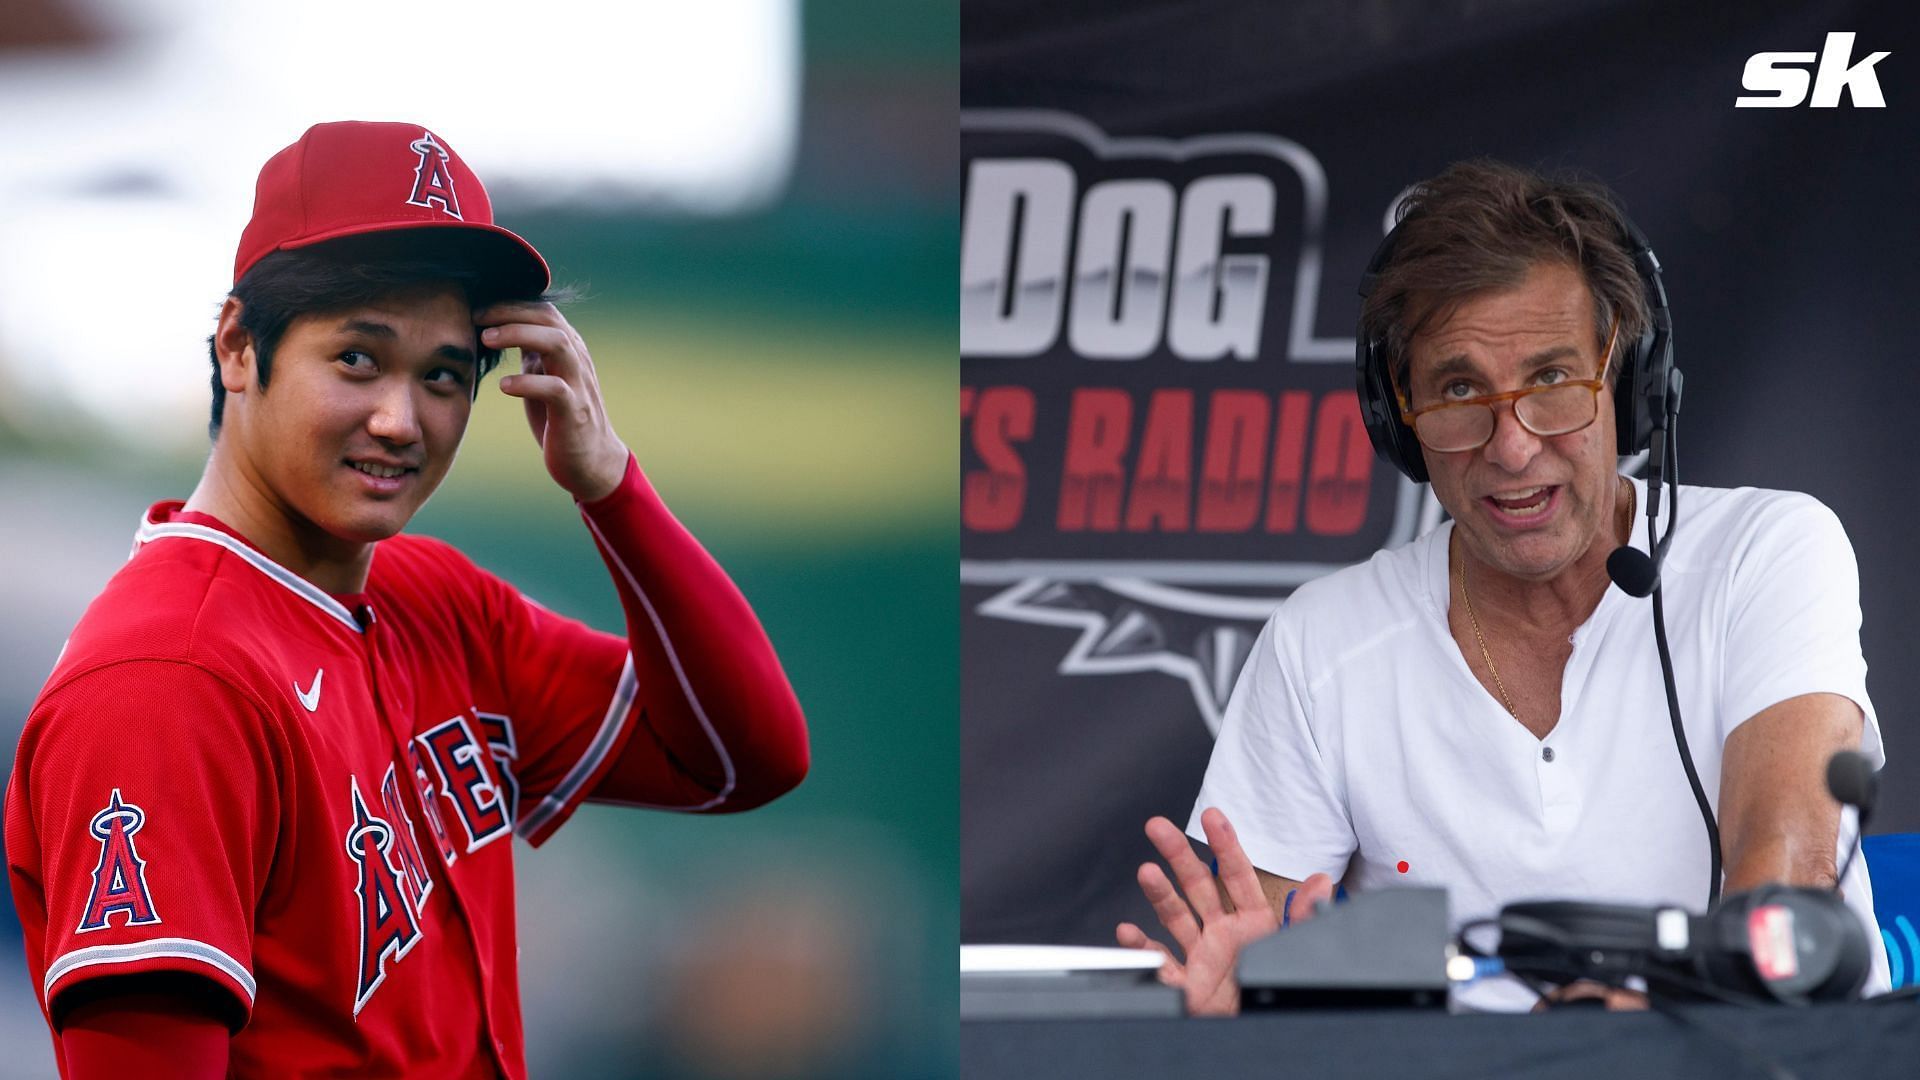 Mad Dog Russo ripped the terms of Shohei Ohtani